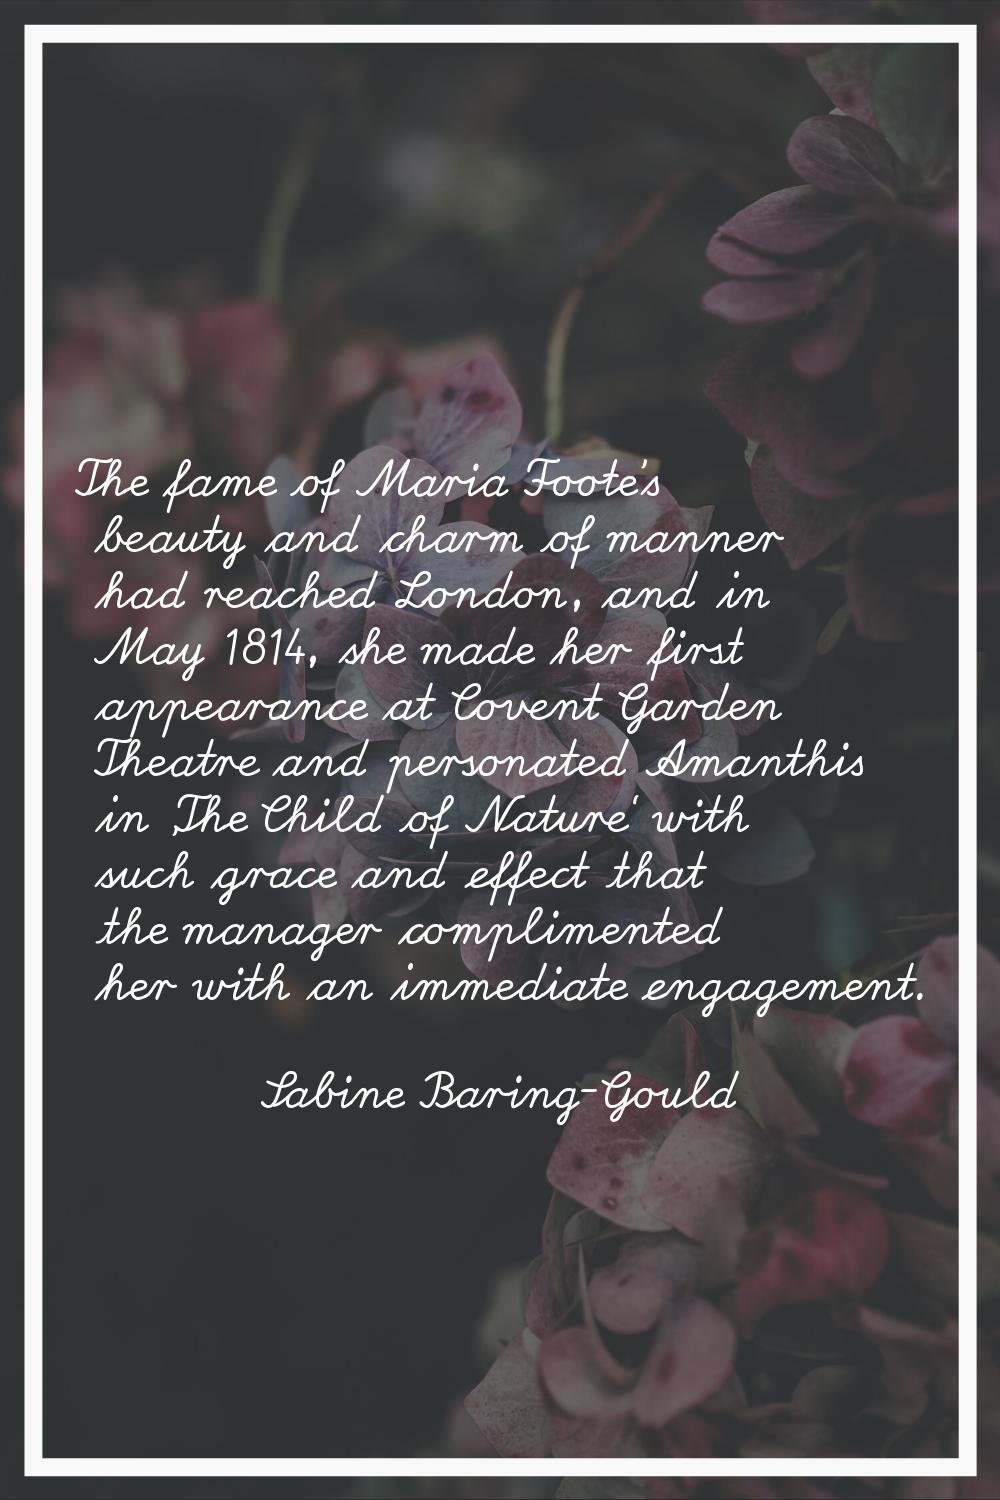 The fame of Maria Foote's beauty and charm of manner had reached London, and in May 1814, she made 